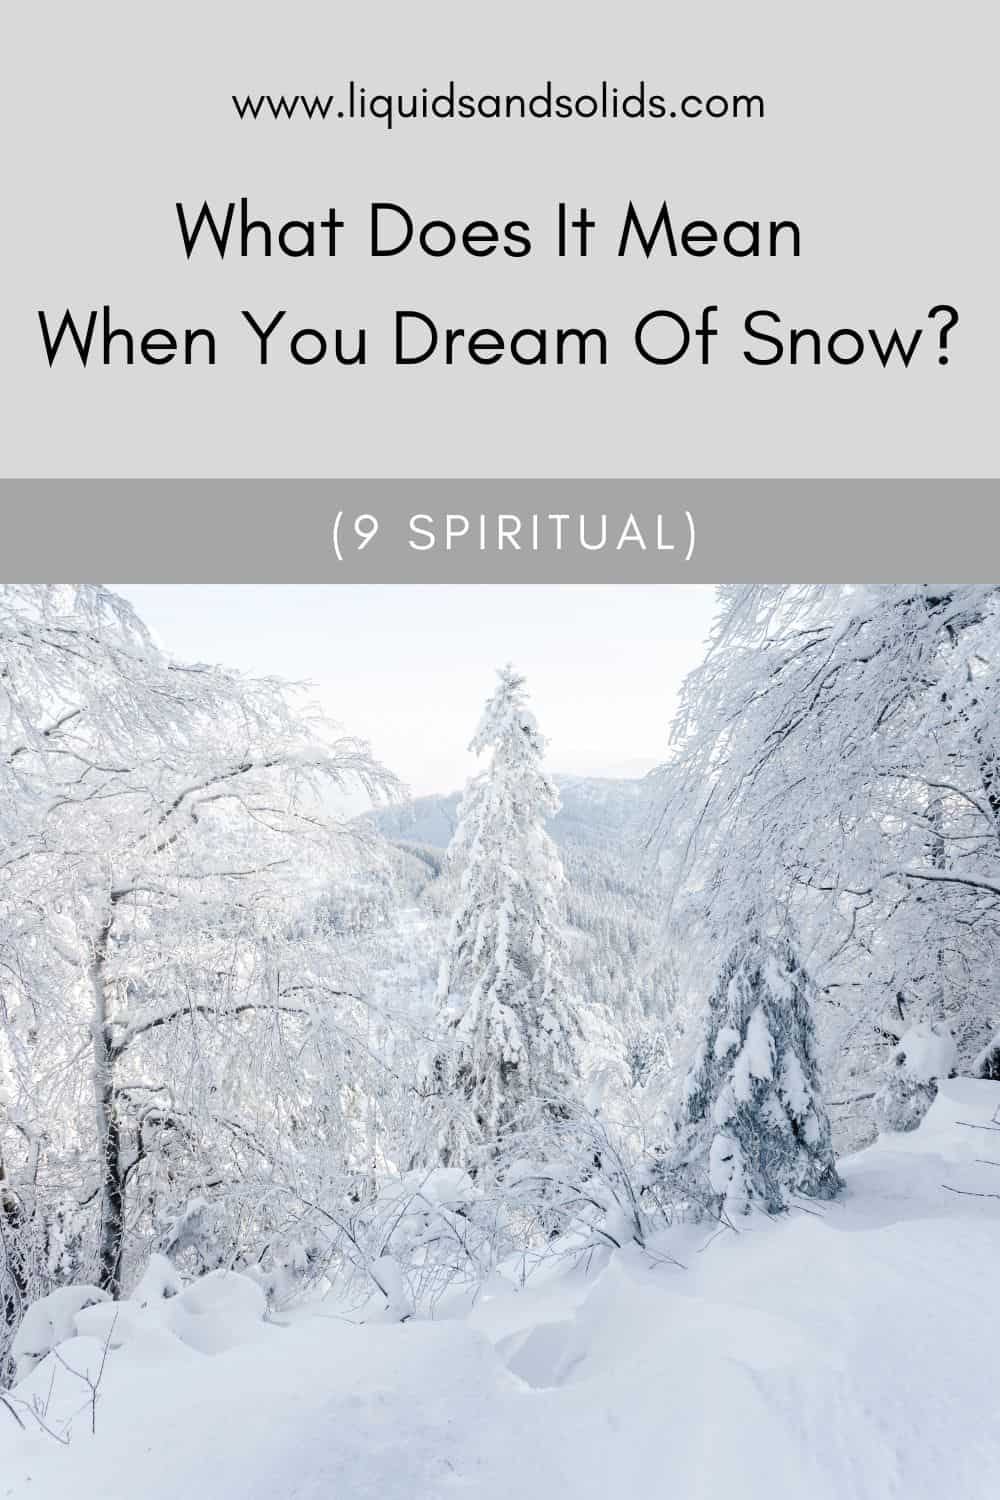 What Does It Mean When You Dream Of Snow? (9 Spiritual)